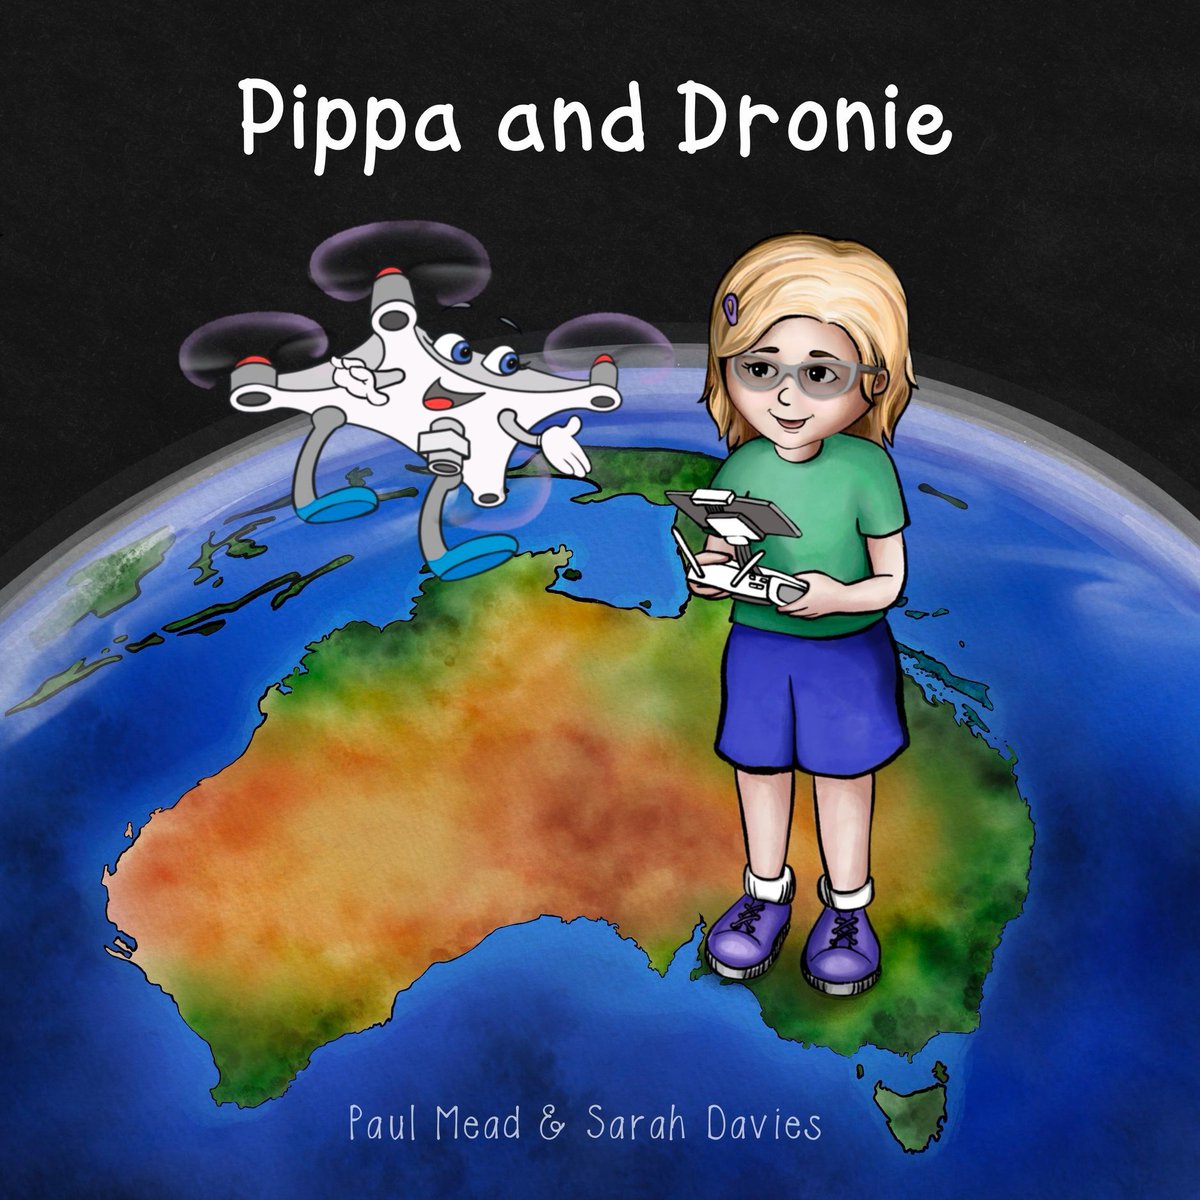 Our latest venture - this time for our youngest STEMinists! Pre order your copy now and #getonegiveone #SheMaps #geospatial #STEM #drone

@AdvanceQld @leanne_kemp @WomenandDrones
@WomenSciAUST @WomeninCoastal @witqld 

pippaanddronie.com